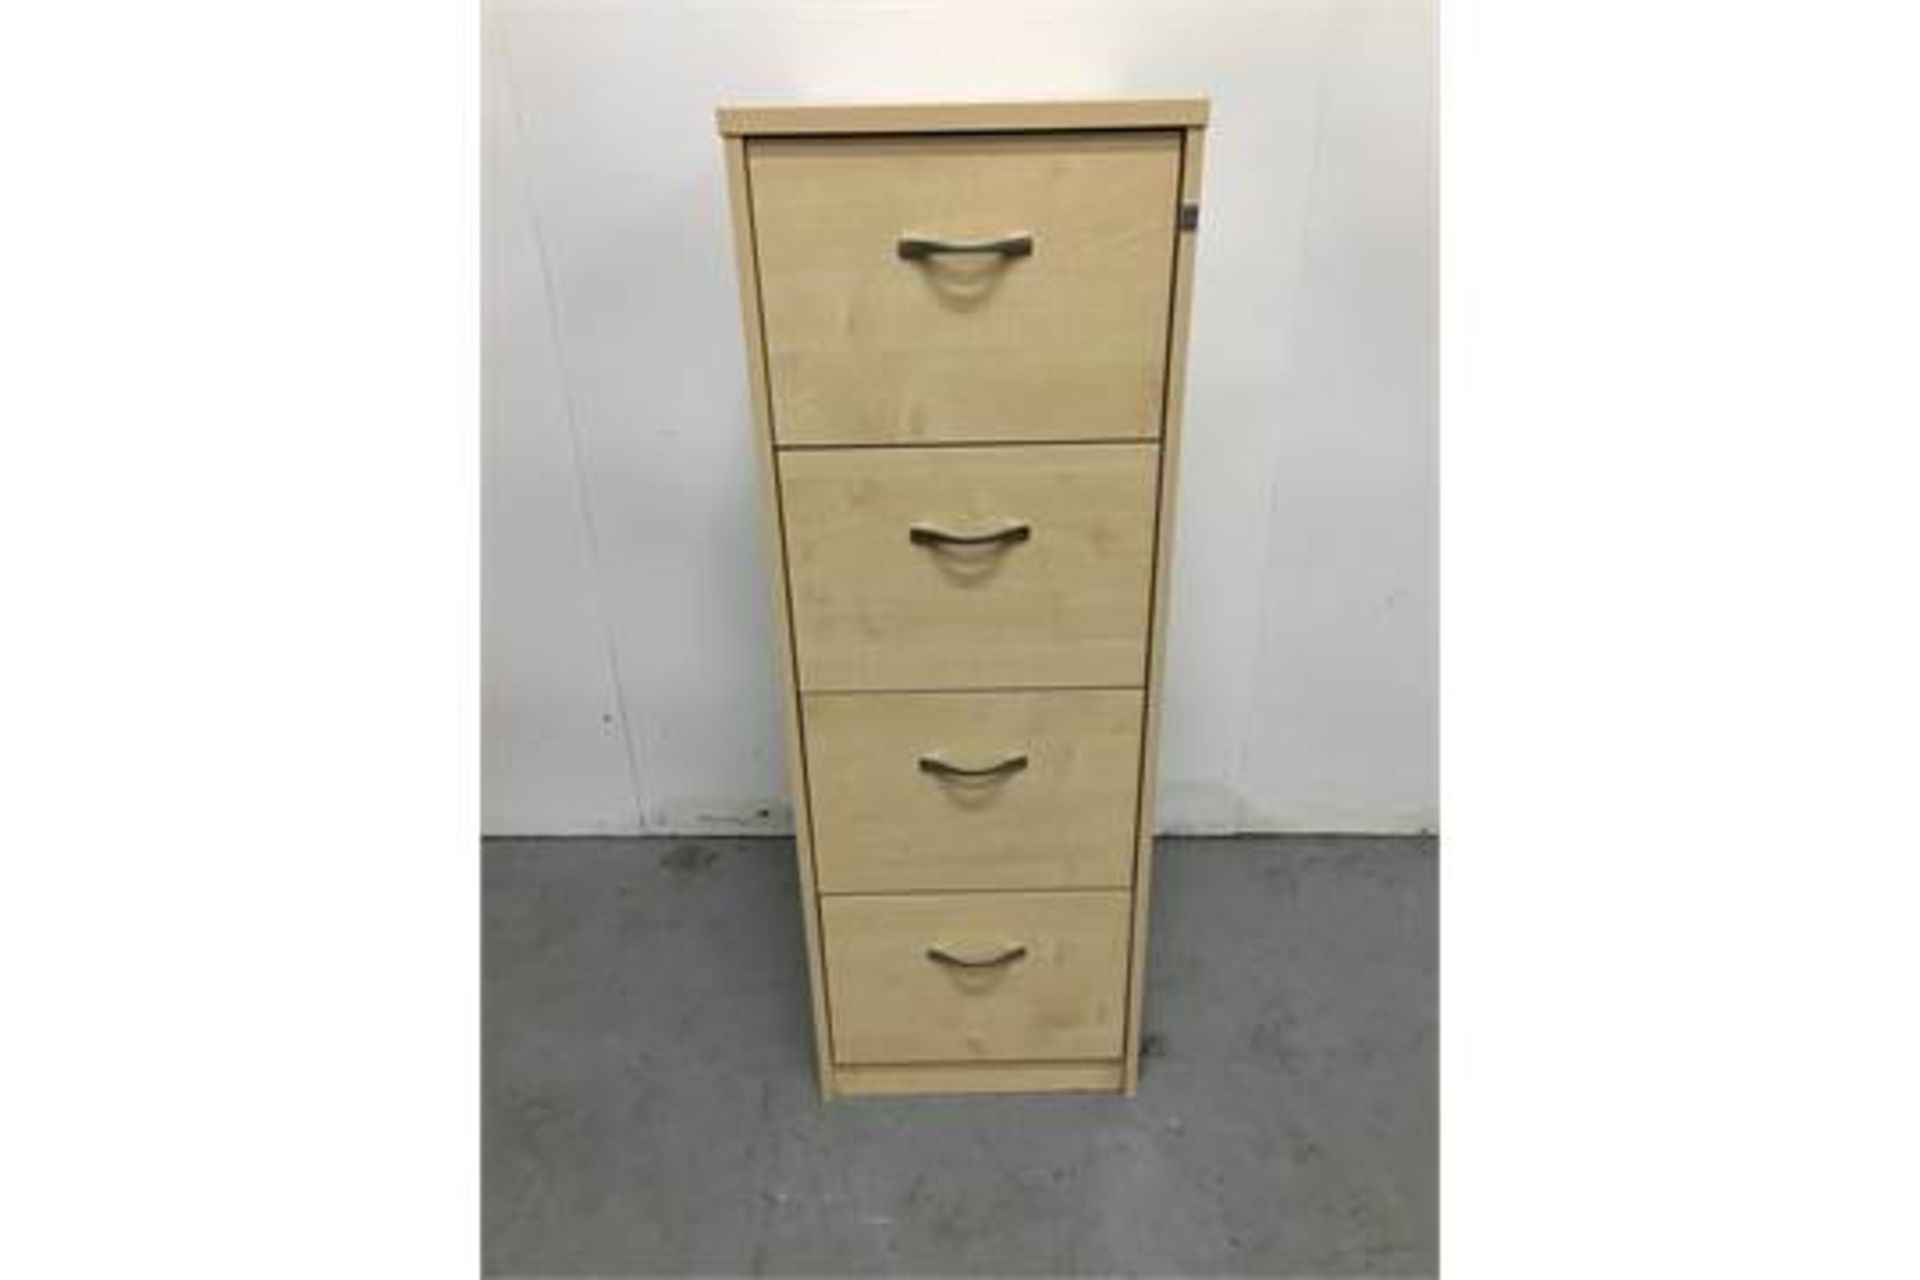 3 x 4 Drawer Filing Cabinet with Lock